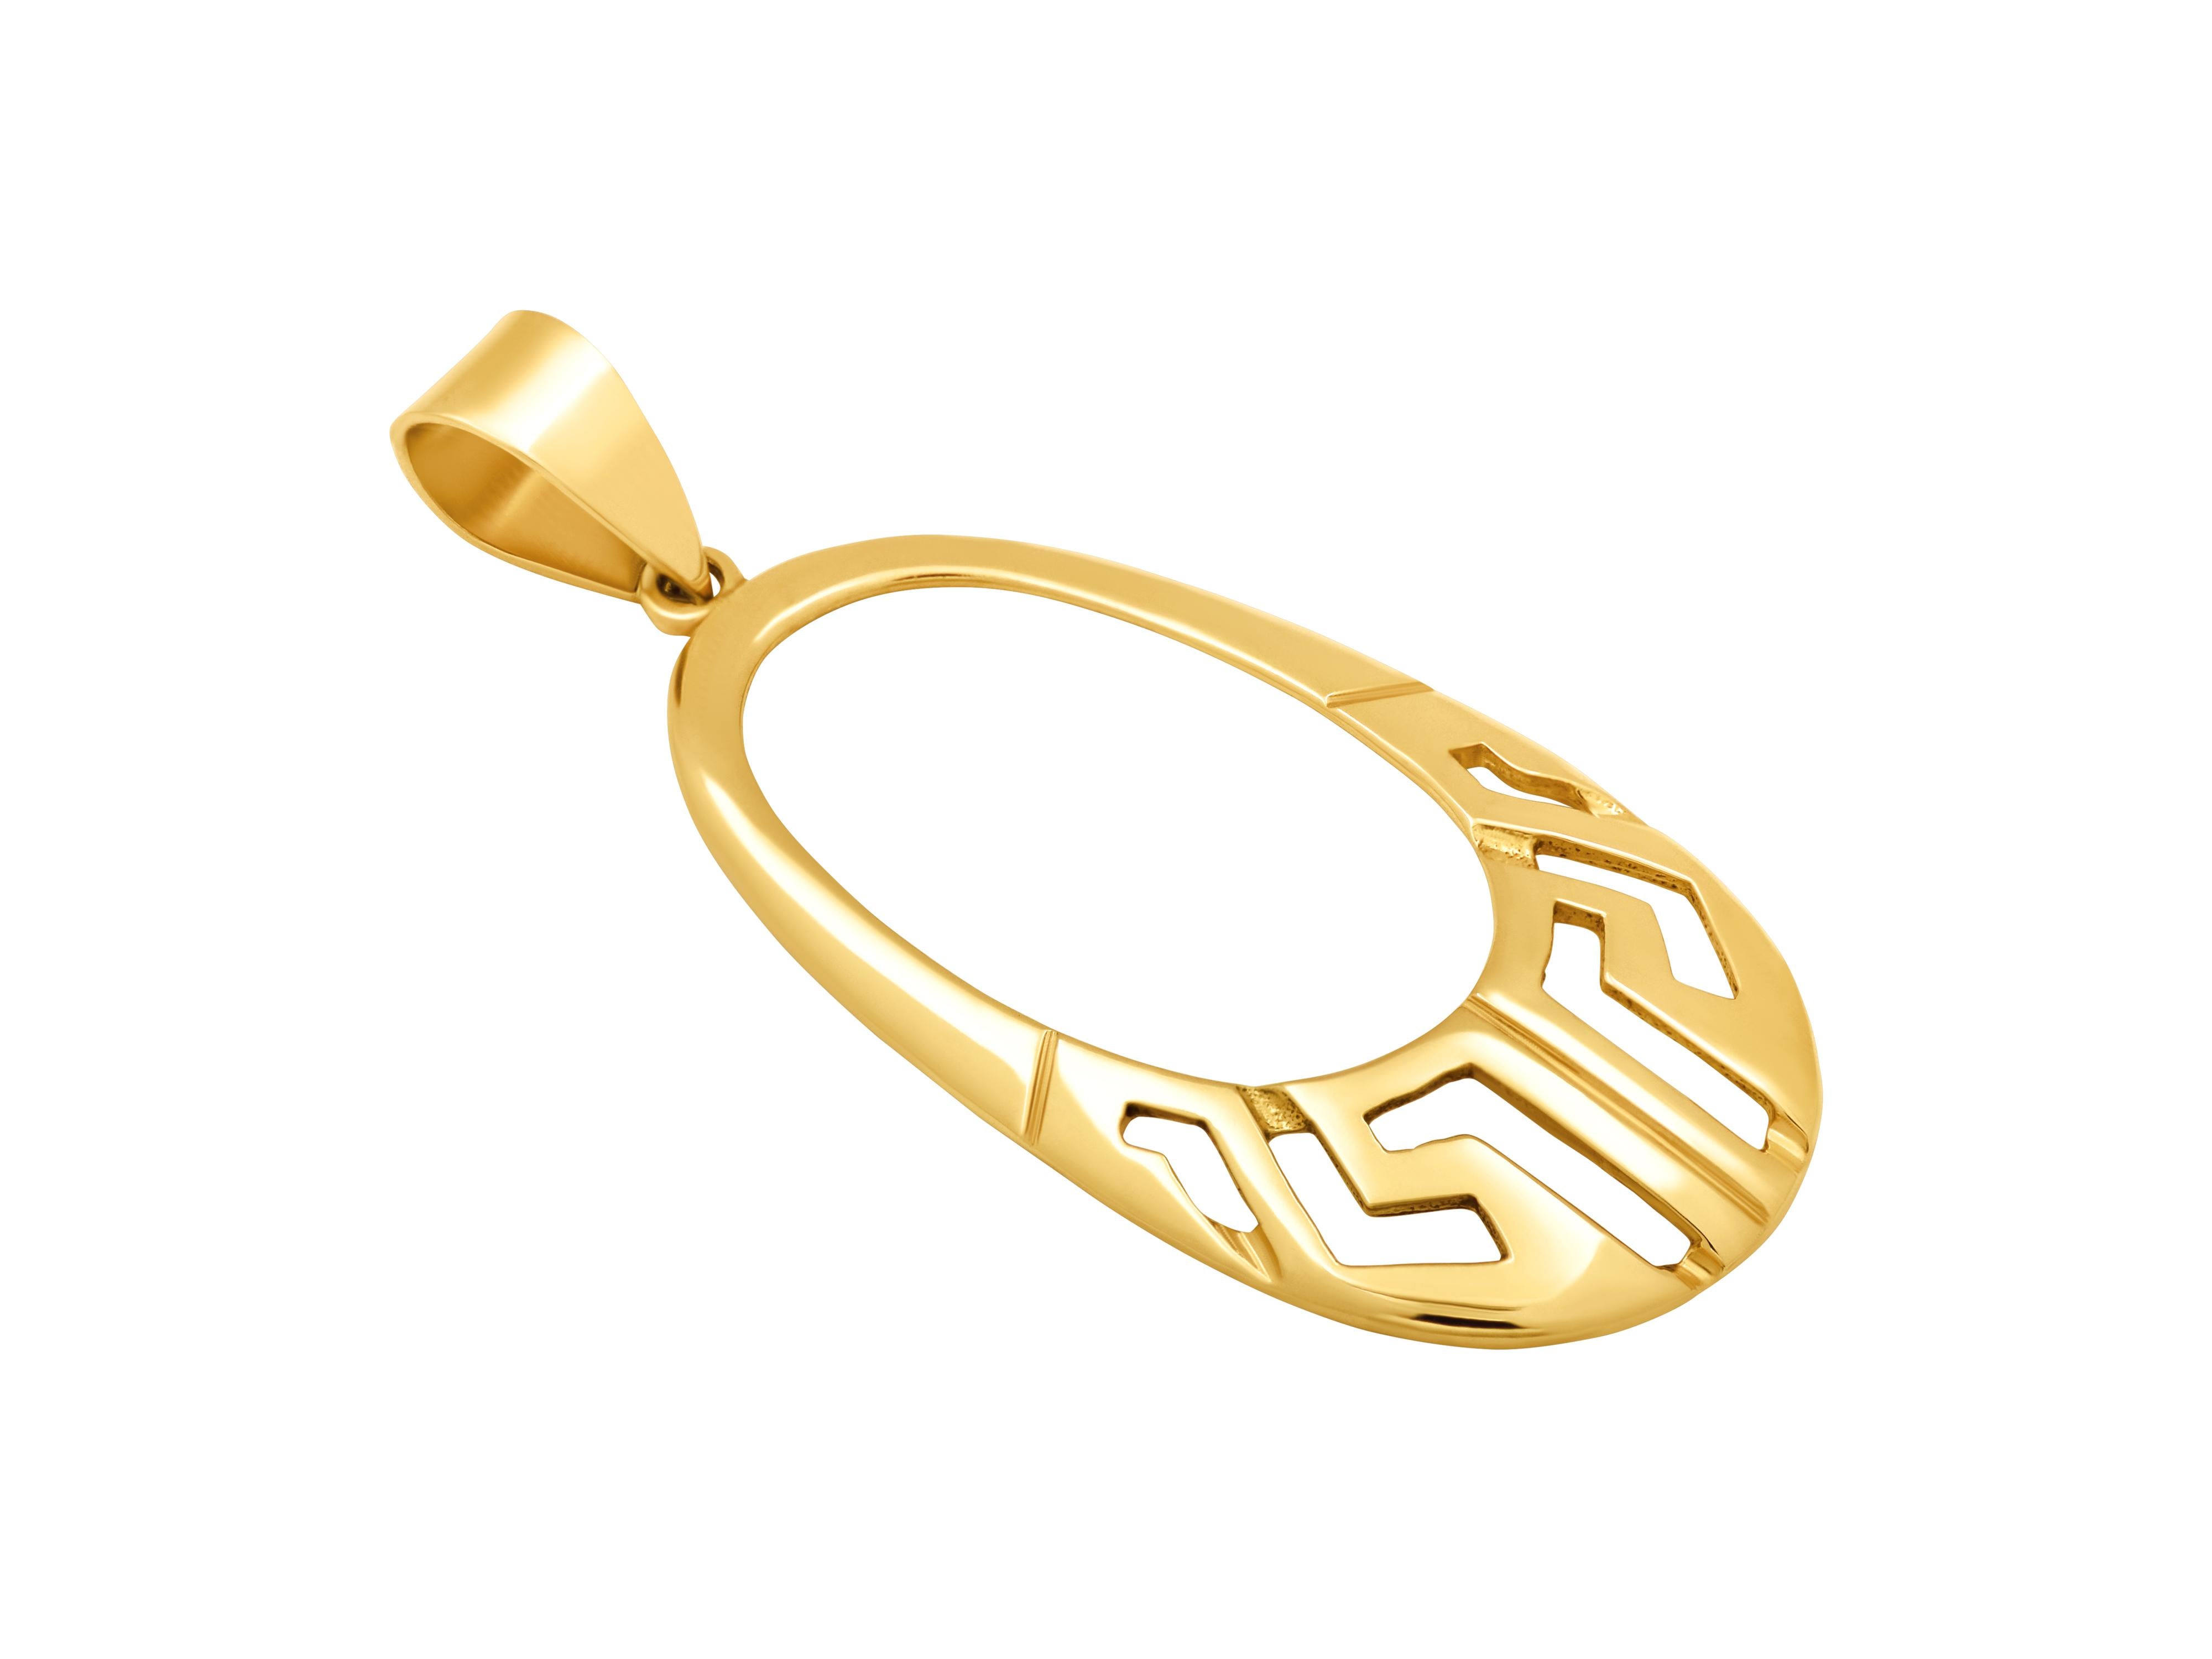 Greek key oval pendant in 18k yellow gold. Unique and not commercial piece with depth and character. A not small size but very light in the eyes due to its openness. Can be made to order in white gold or set with a diamond pave finish. You will love